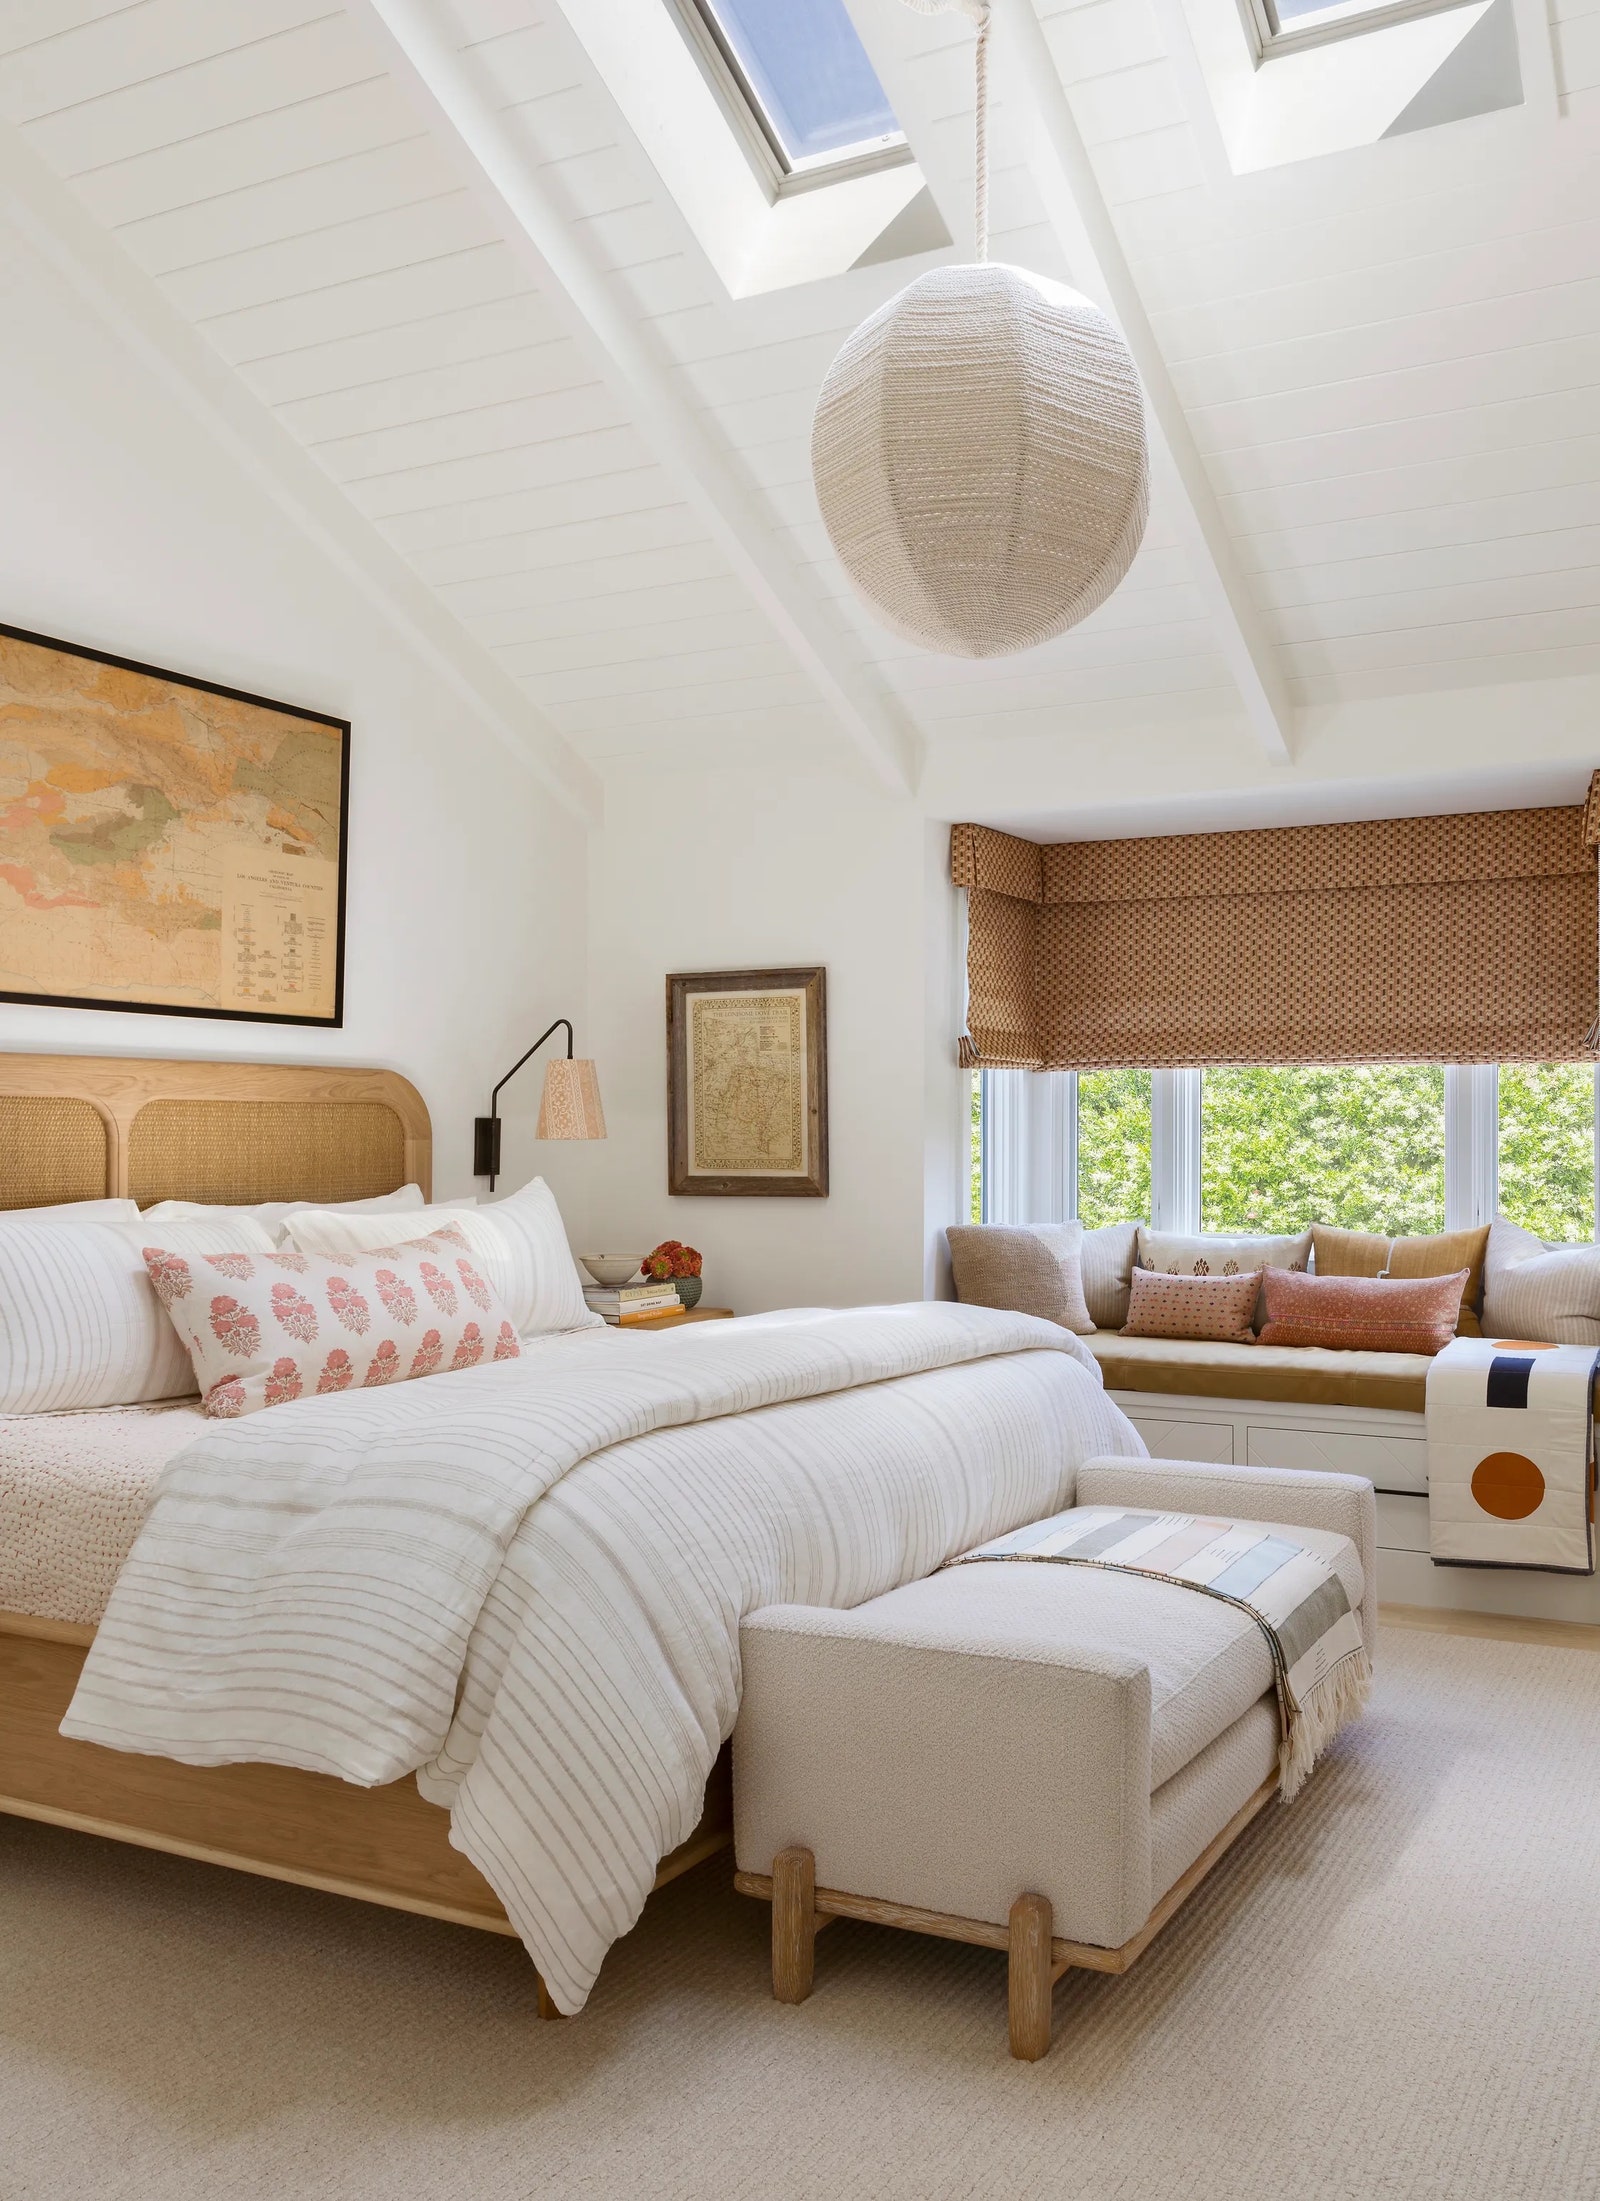 Burnham Design used a neutral palette soft prints textural fabrics and caningquilting details in a primary bedroom...